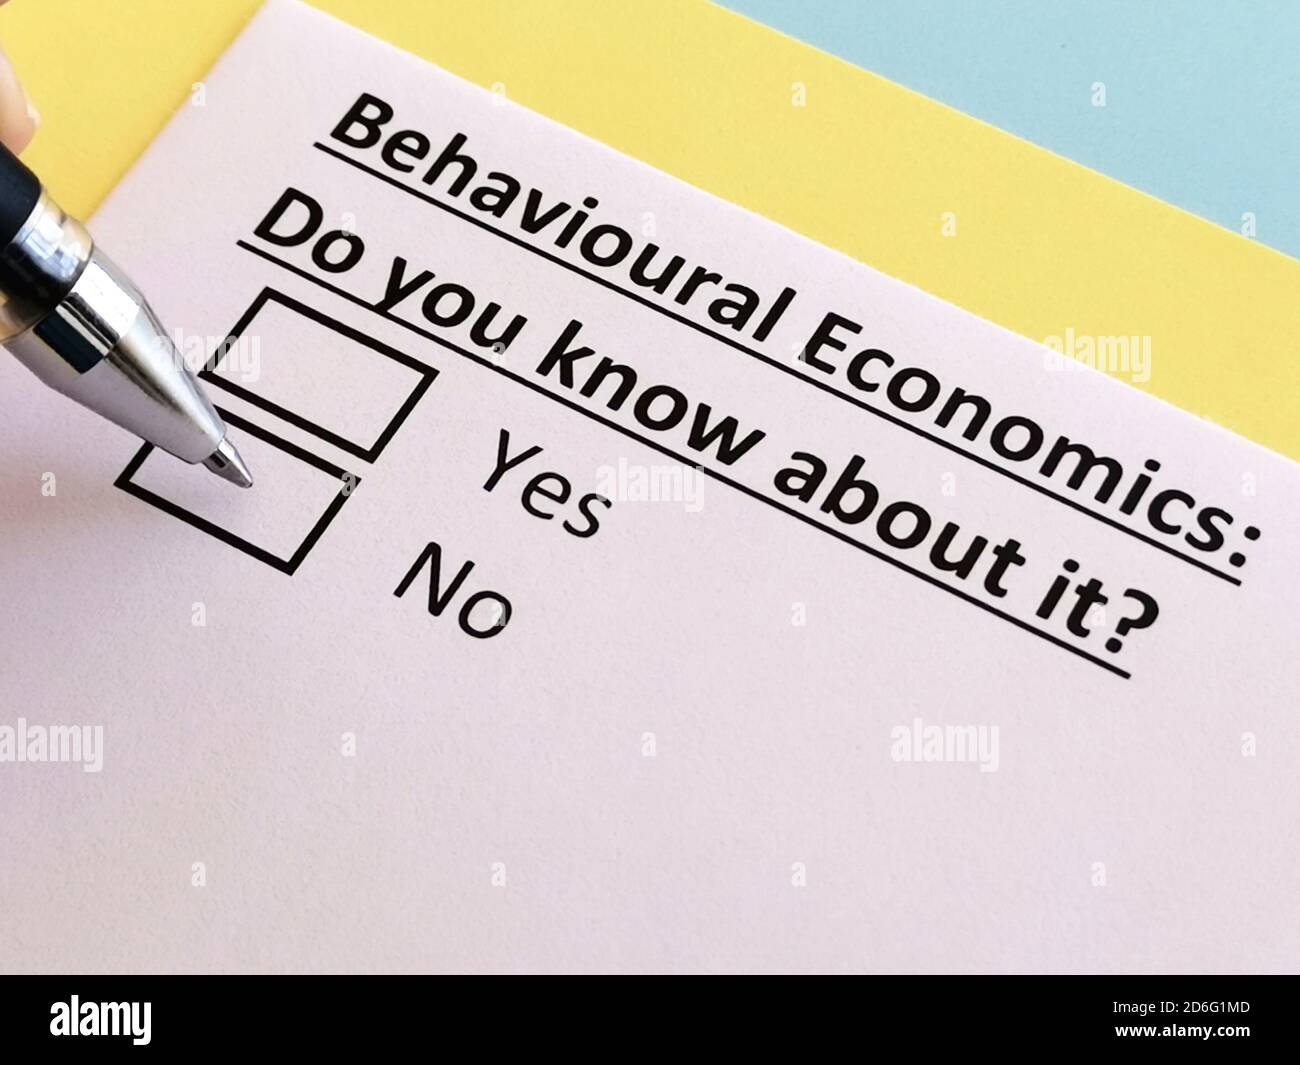 One person is answering quetion about behavioural economics. Stock Photo